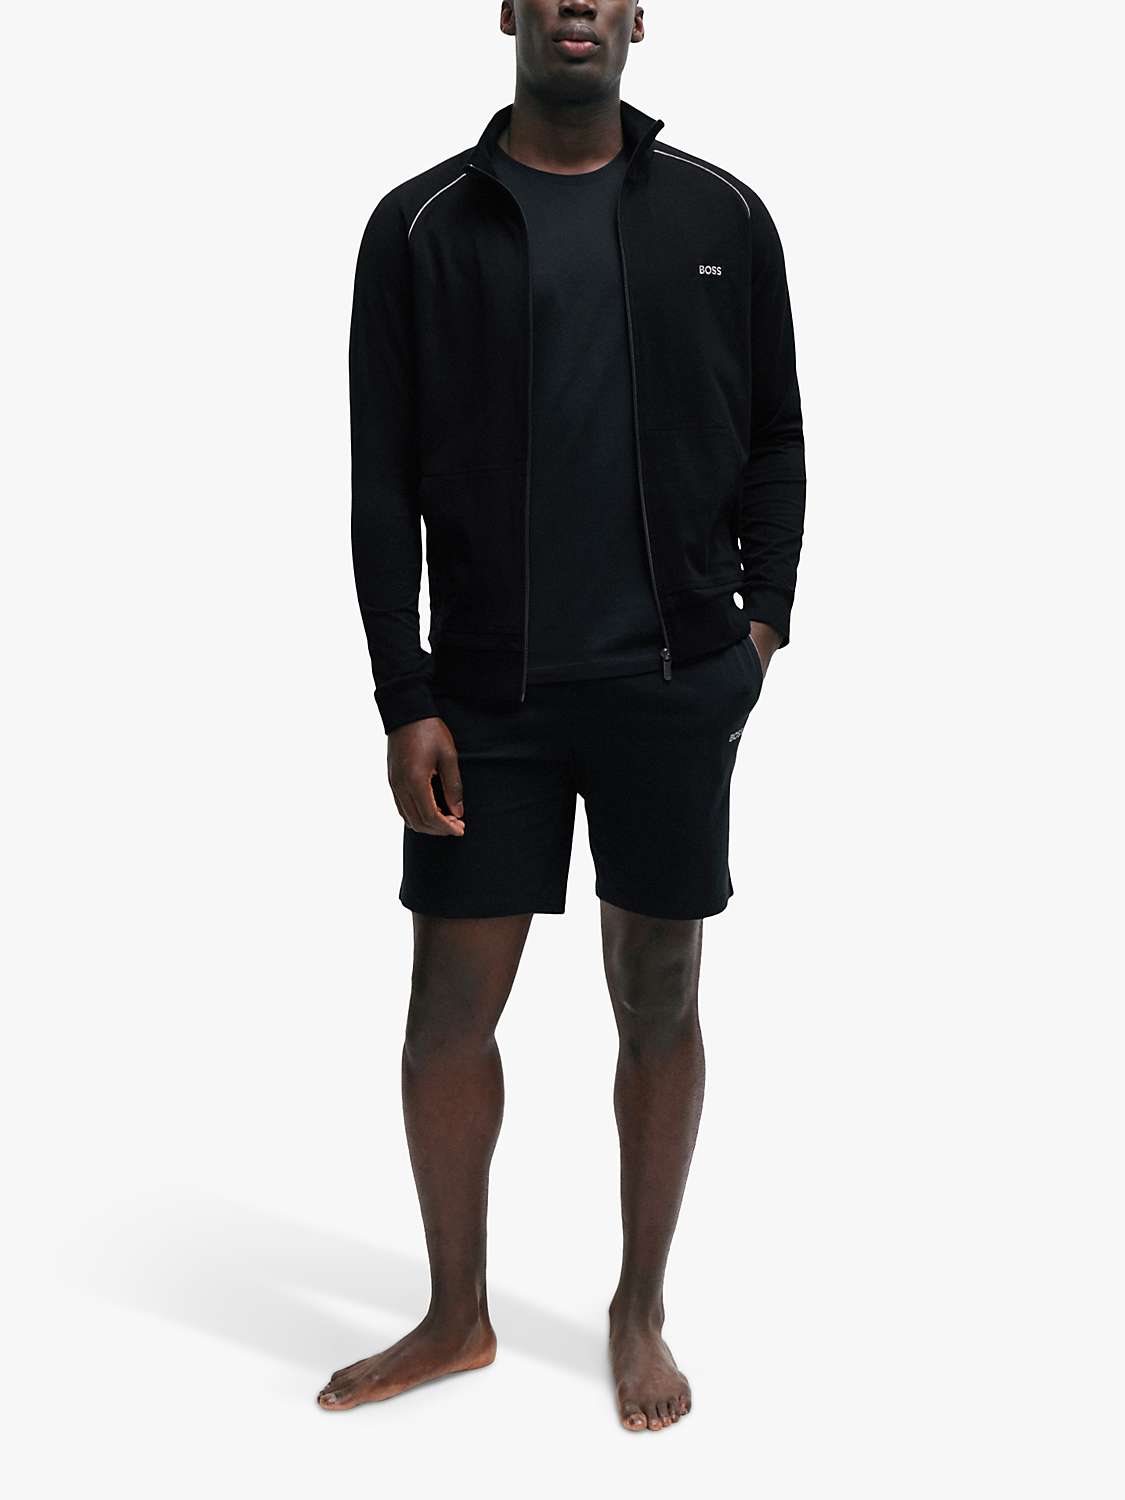 Buy BOSS Contrast Piping Track Top, Black Online at johnlewis.com